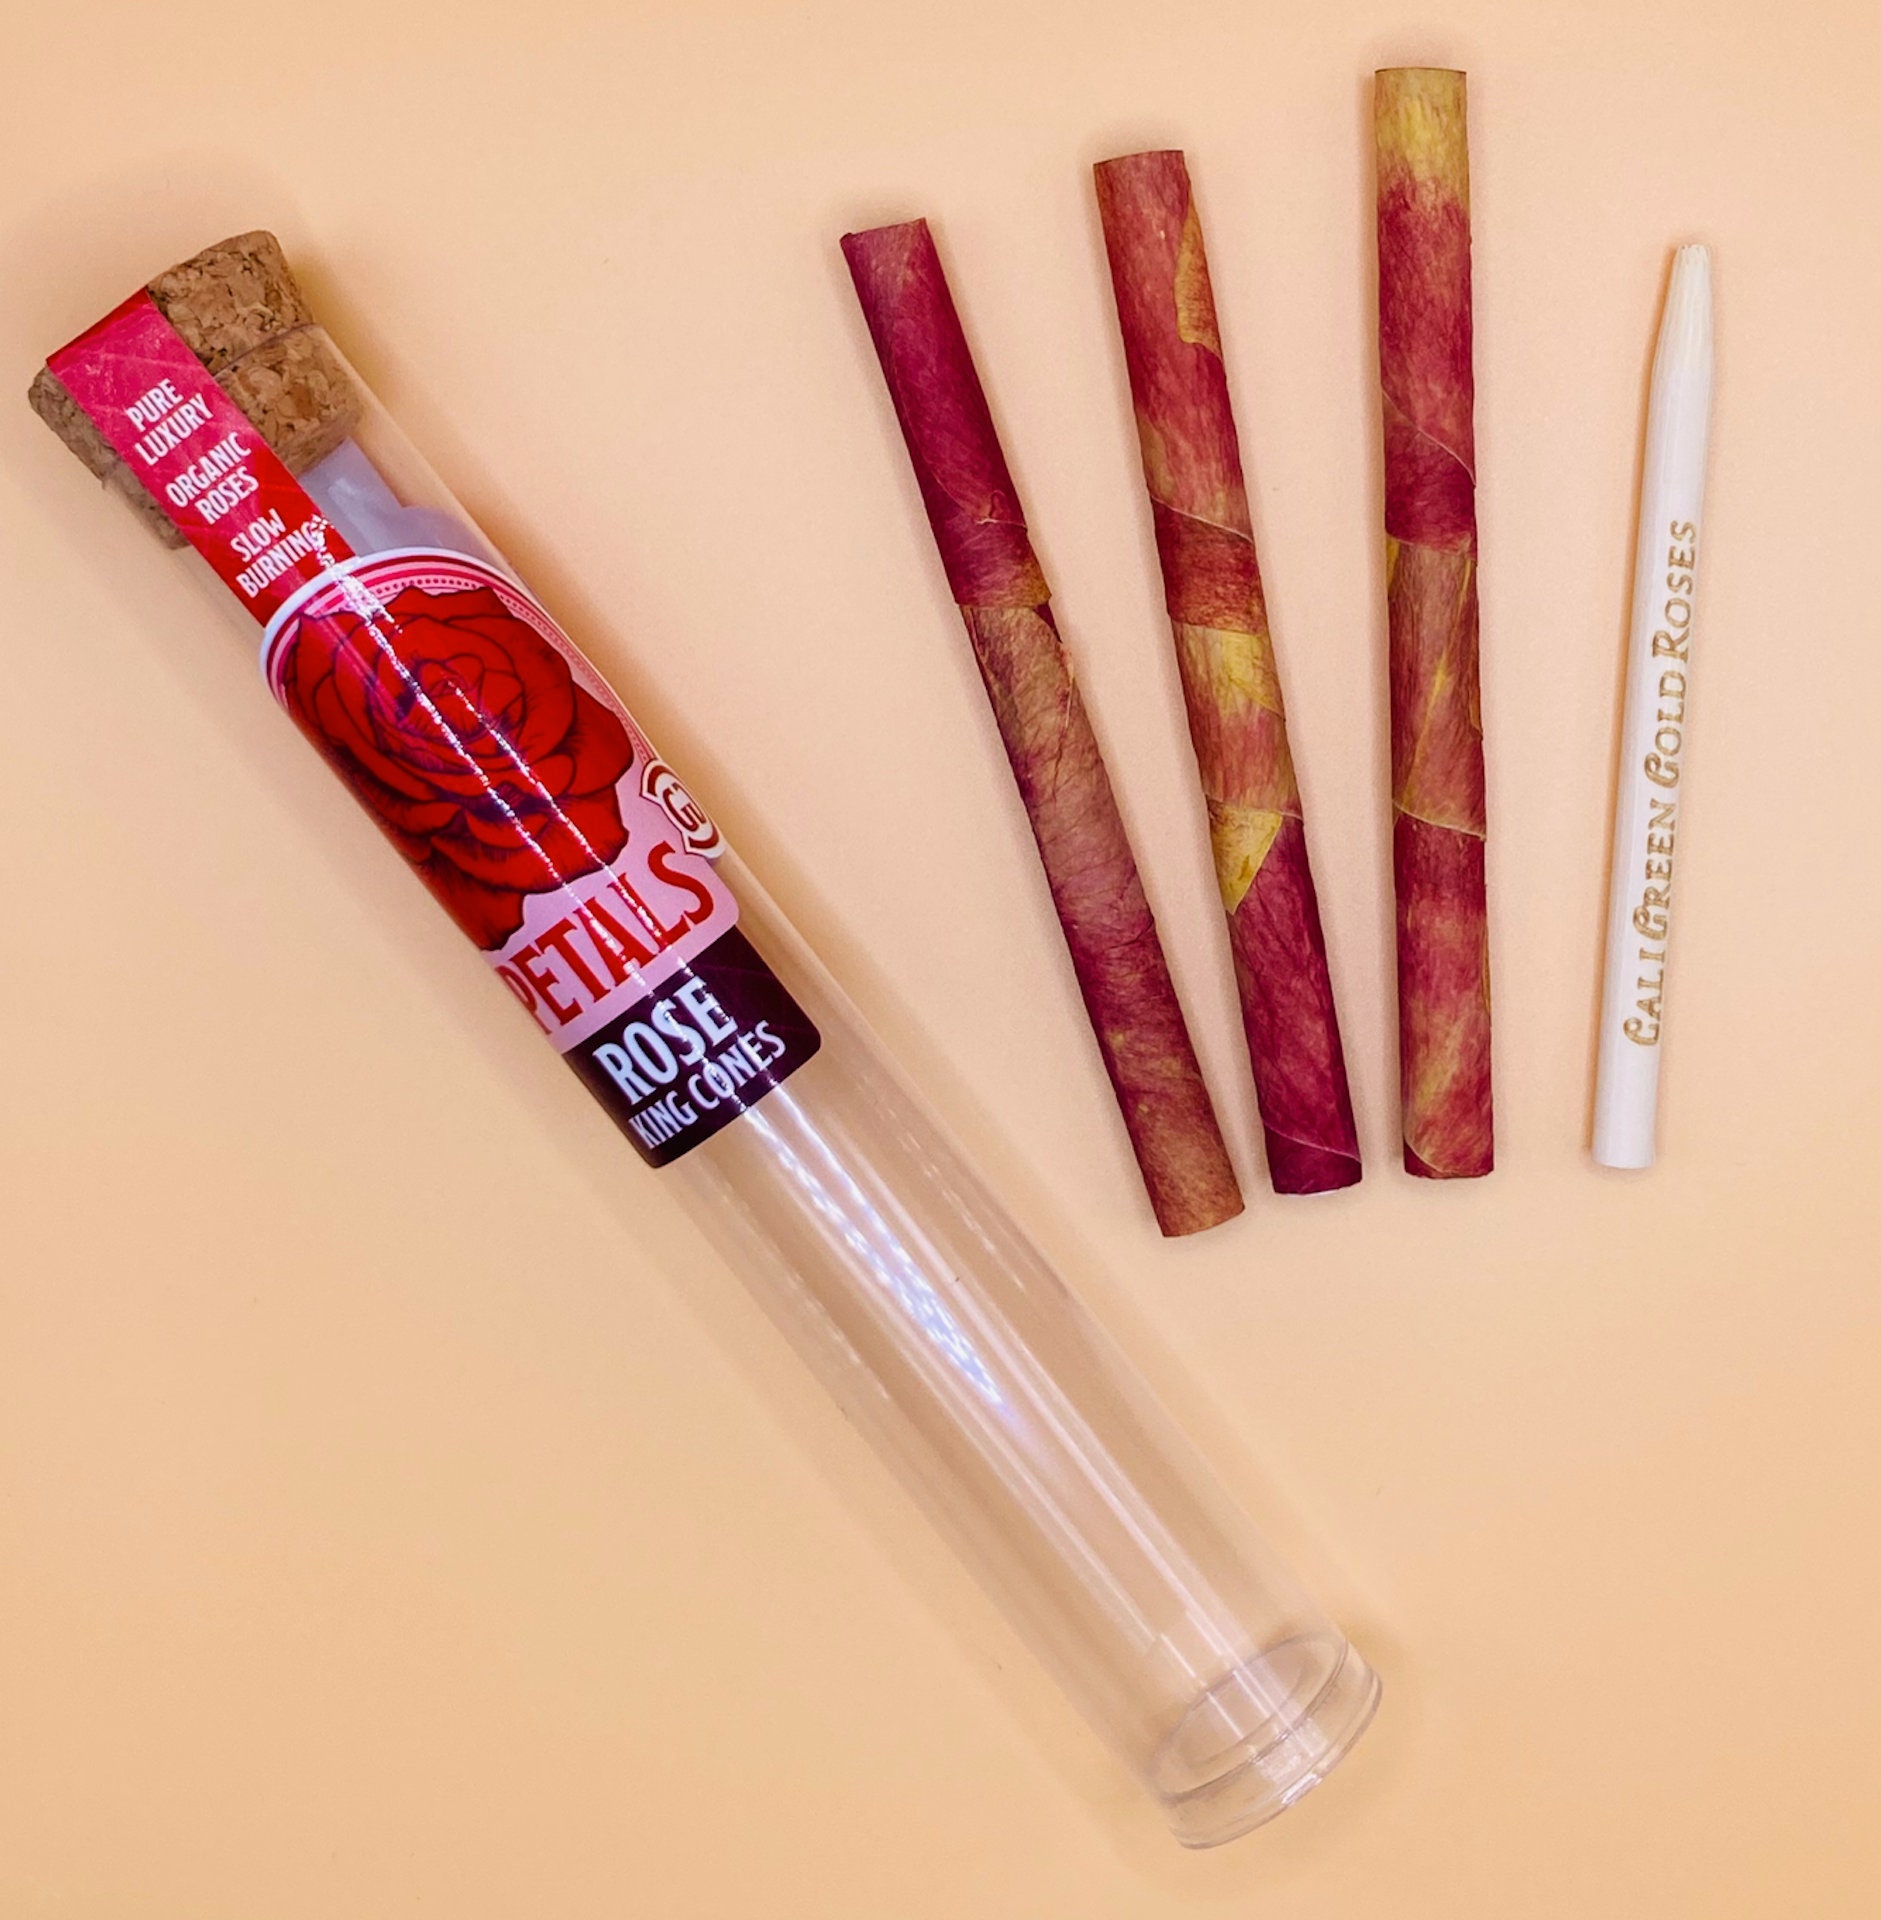 6 King Size Red Rose Petal Preroll Cones With Filter l Natural Hand-Rolled  Rose Cones l Made With Organic Rose Petals